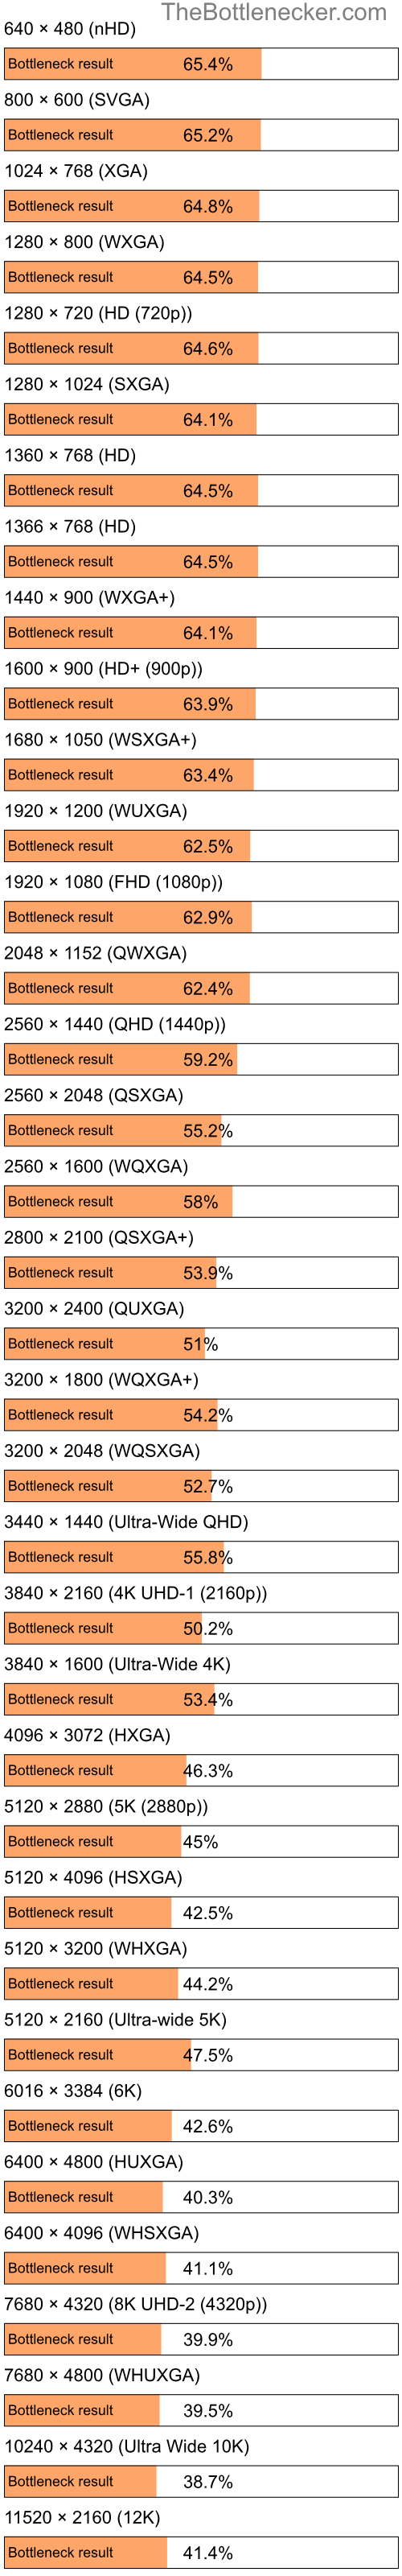 Bottleneck results by resolution for Intel Pentium G3450 and NVIDIA GeForce RTX 3070 in Graphic Card Intense Tasks